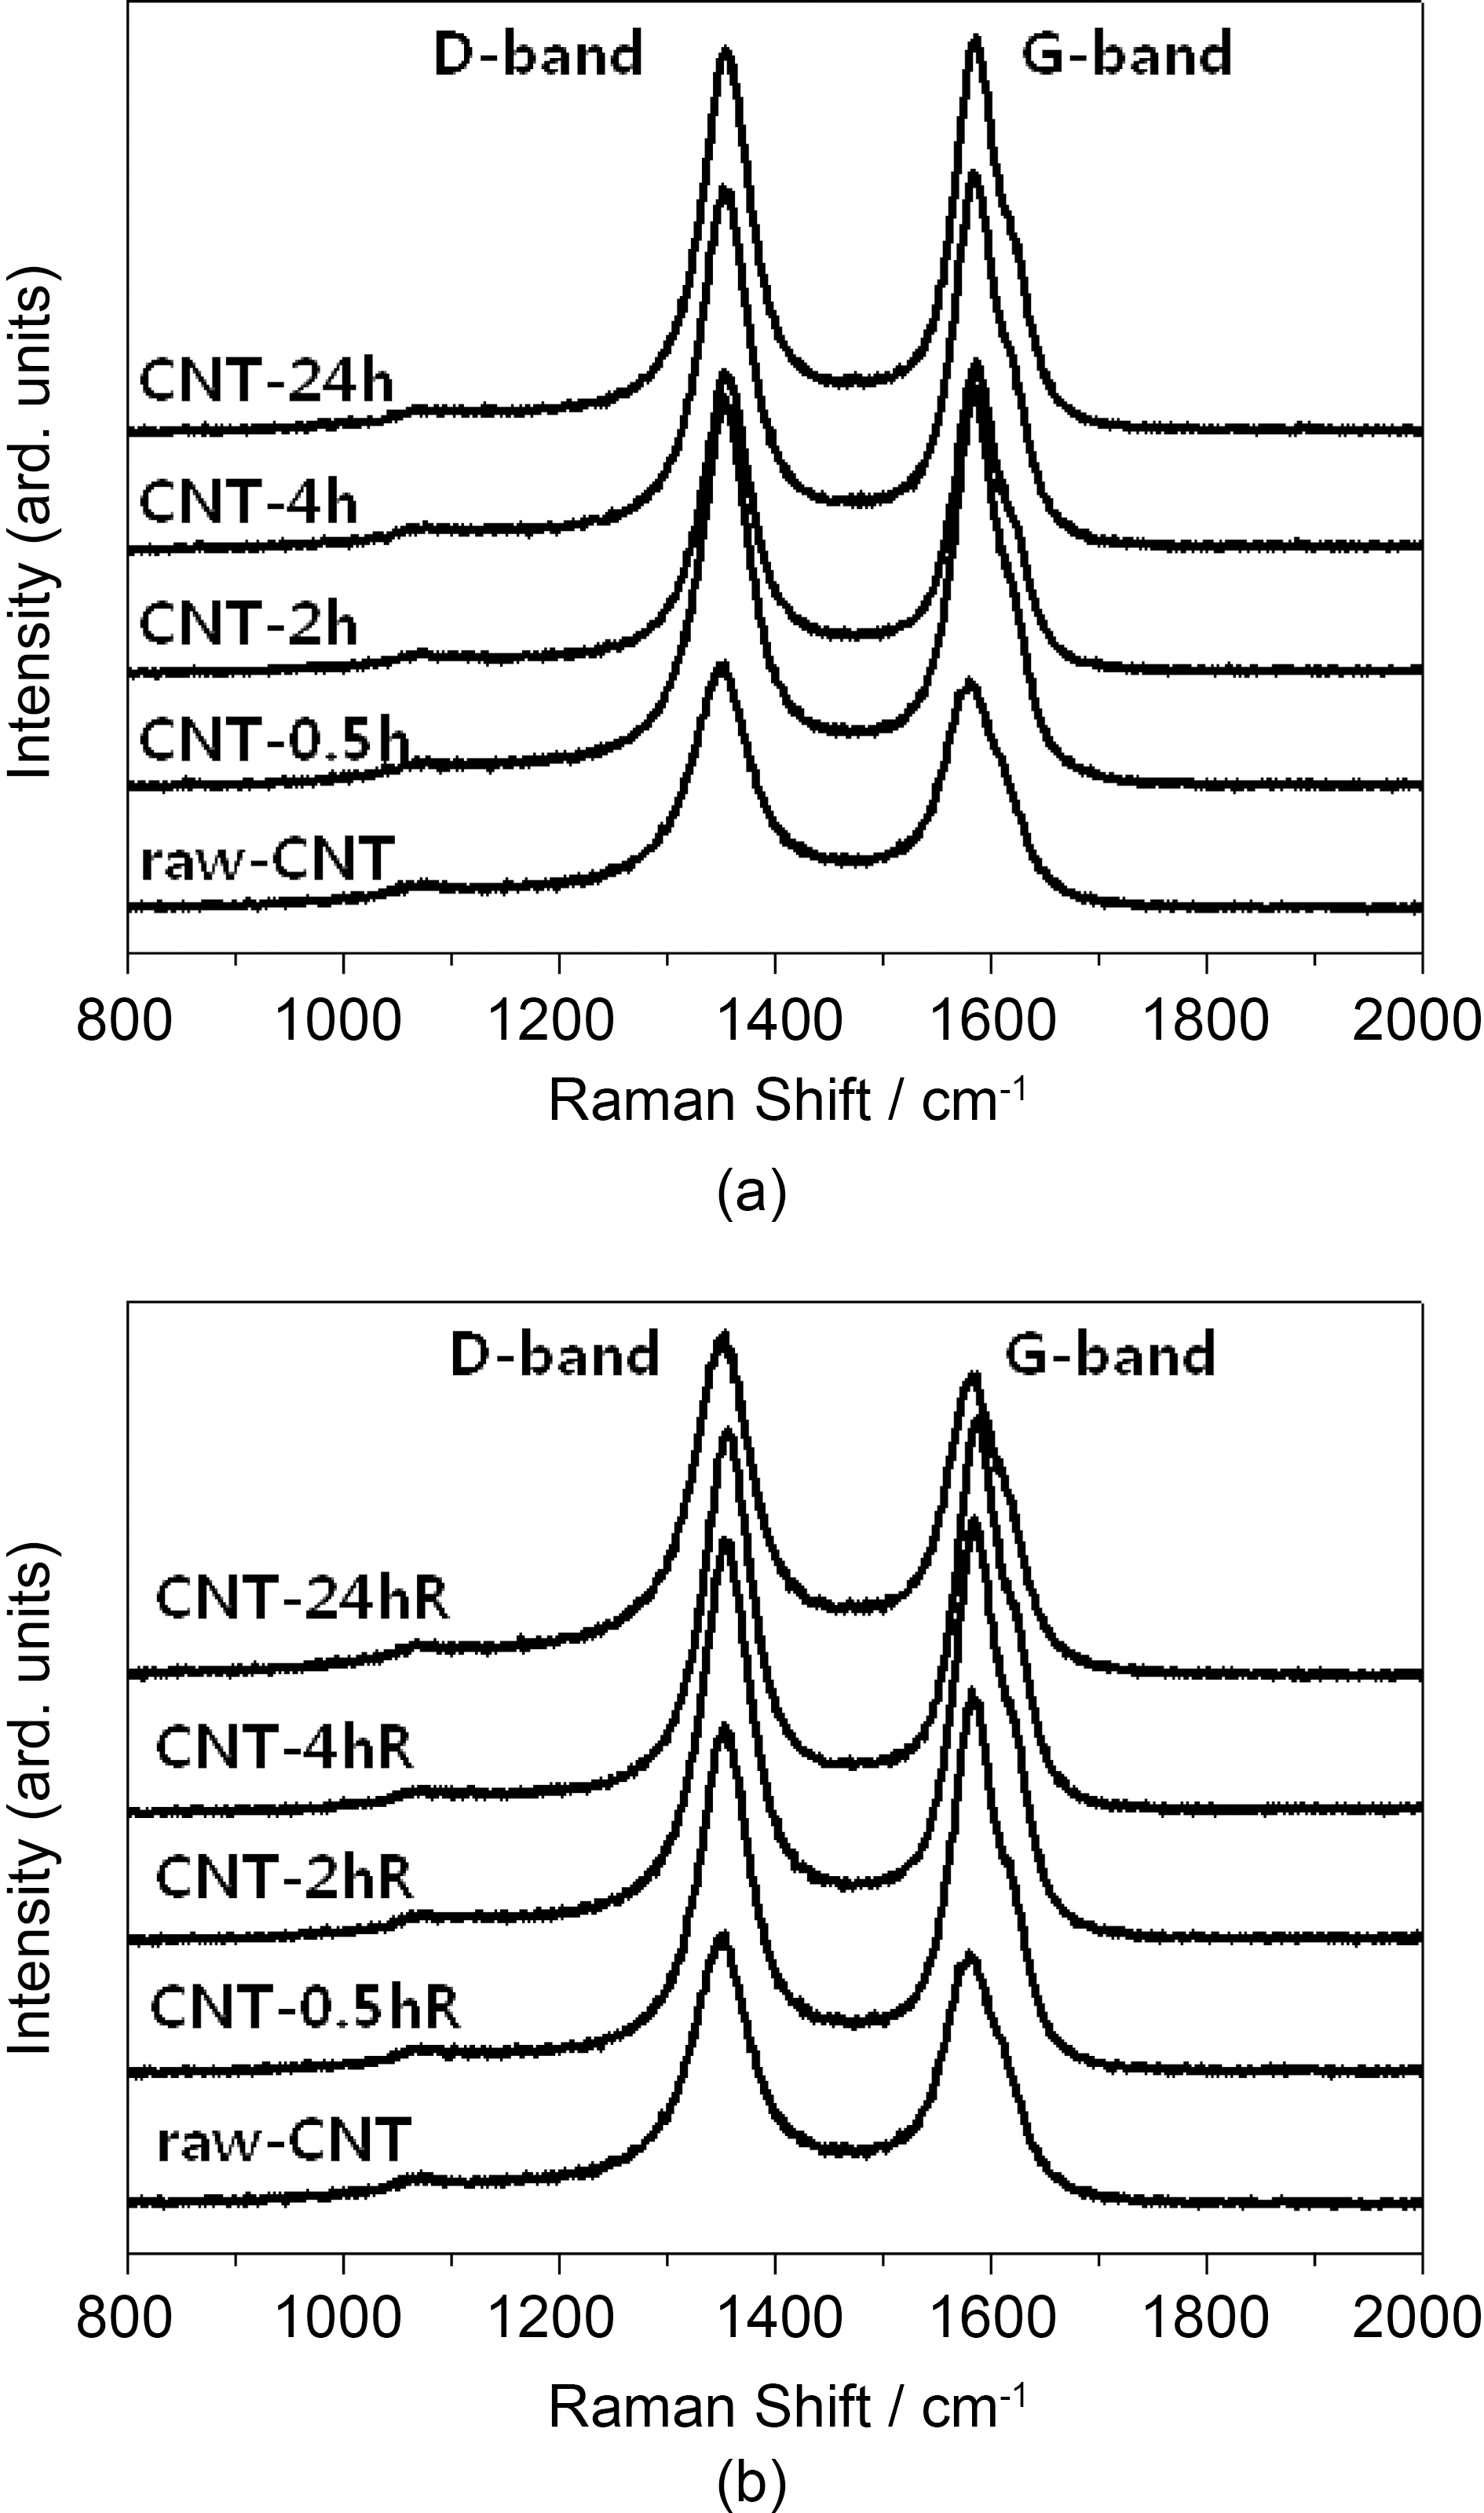 Raman spectra of: (a) CNTs treated by 4.0 M H2SO4solution (at room temperature) and (b) CNTs treated by 4 MH2SO4 solution (refluxed at 90°C) at different time intervals.